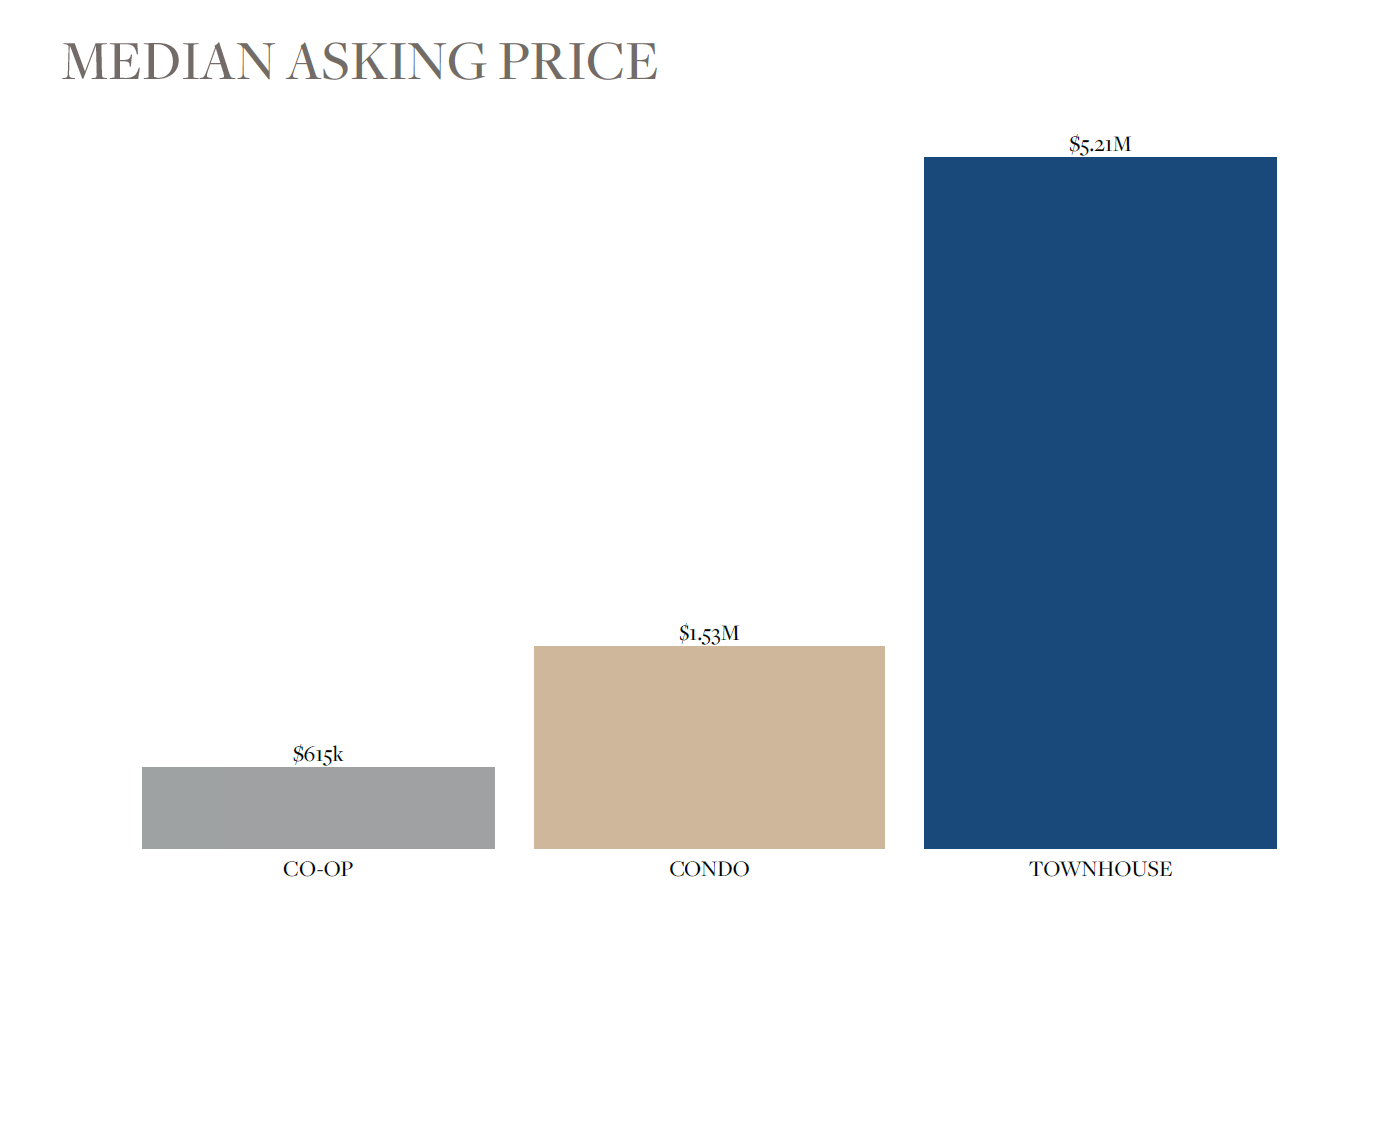 Median Asking Price by Type - Theatre District & Hells Kitchen